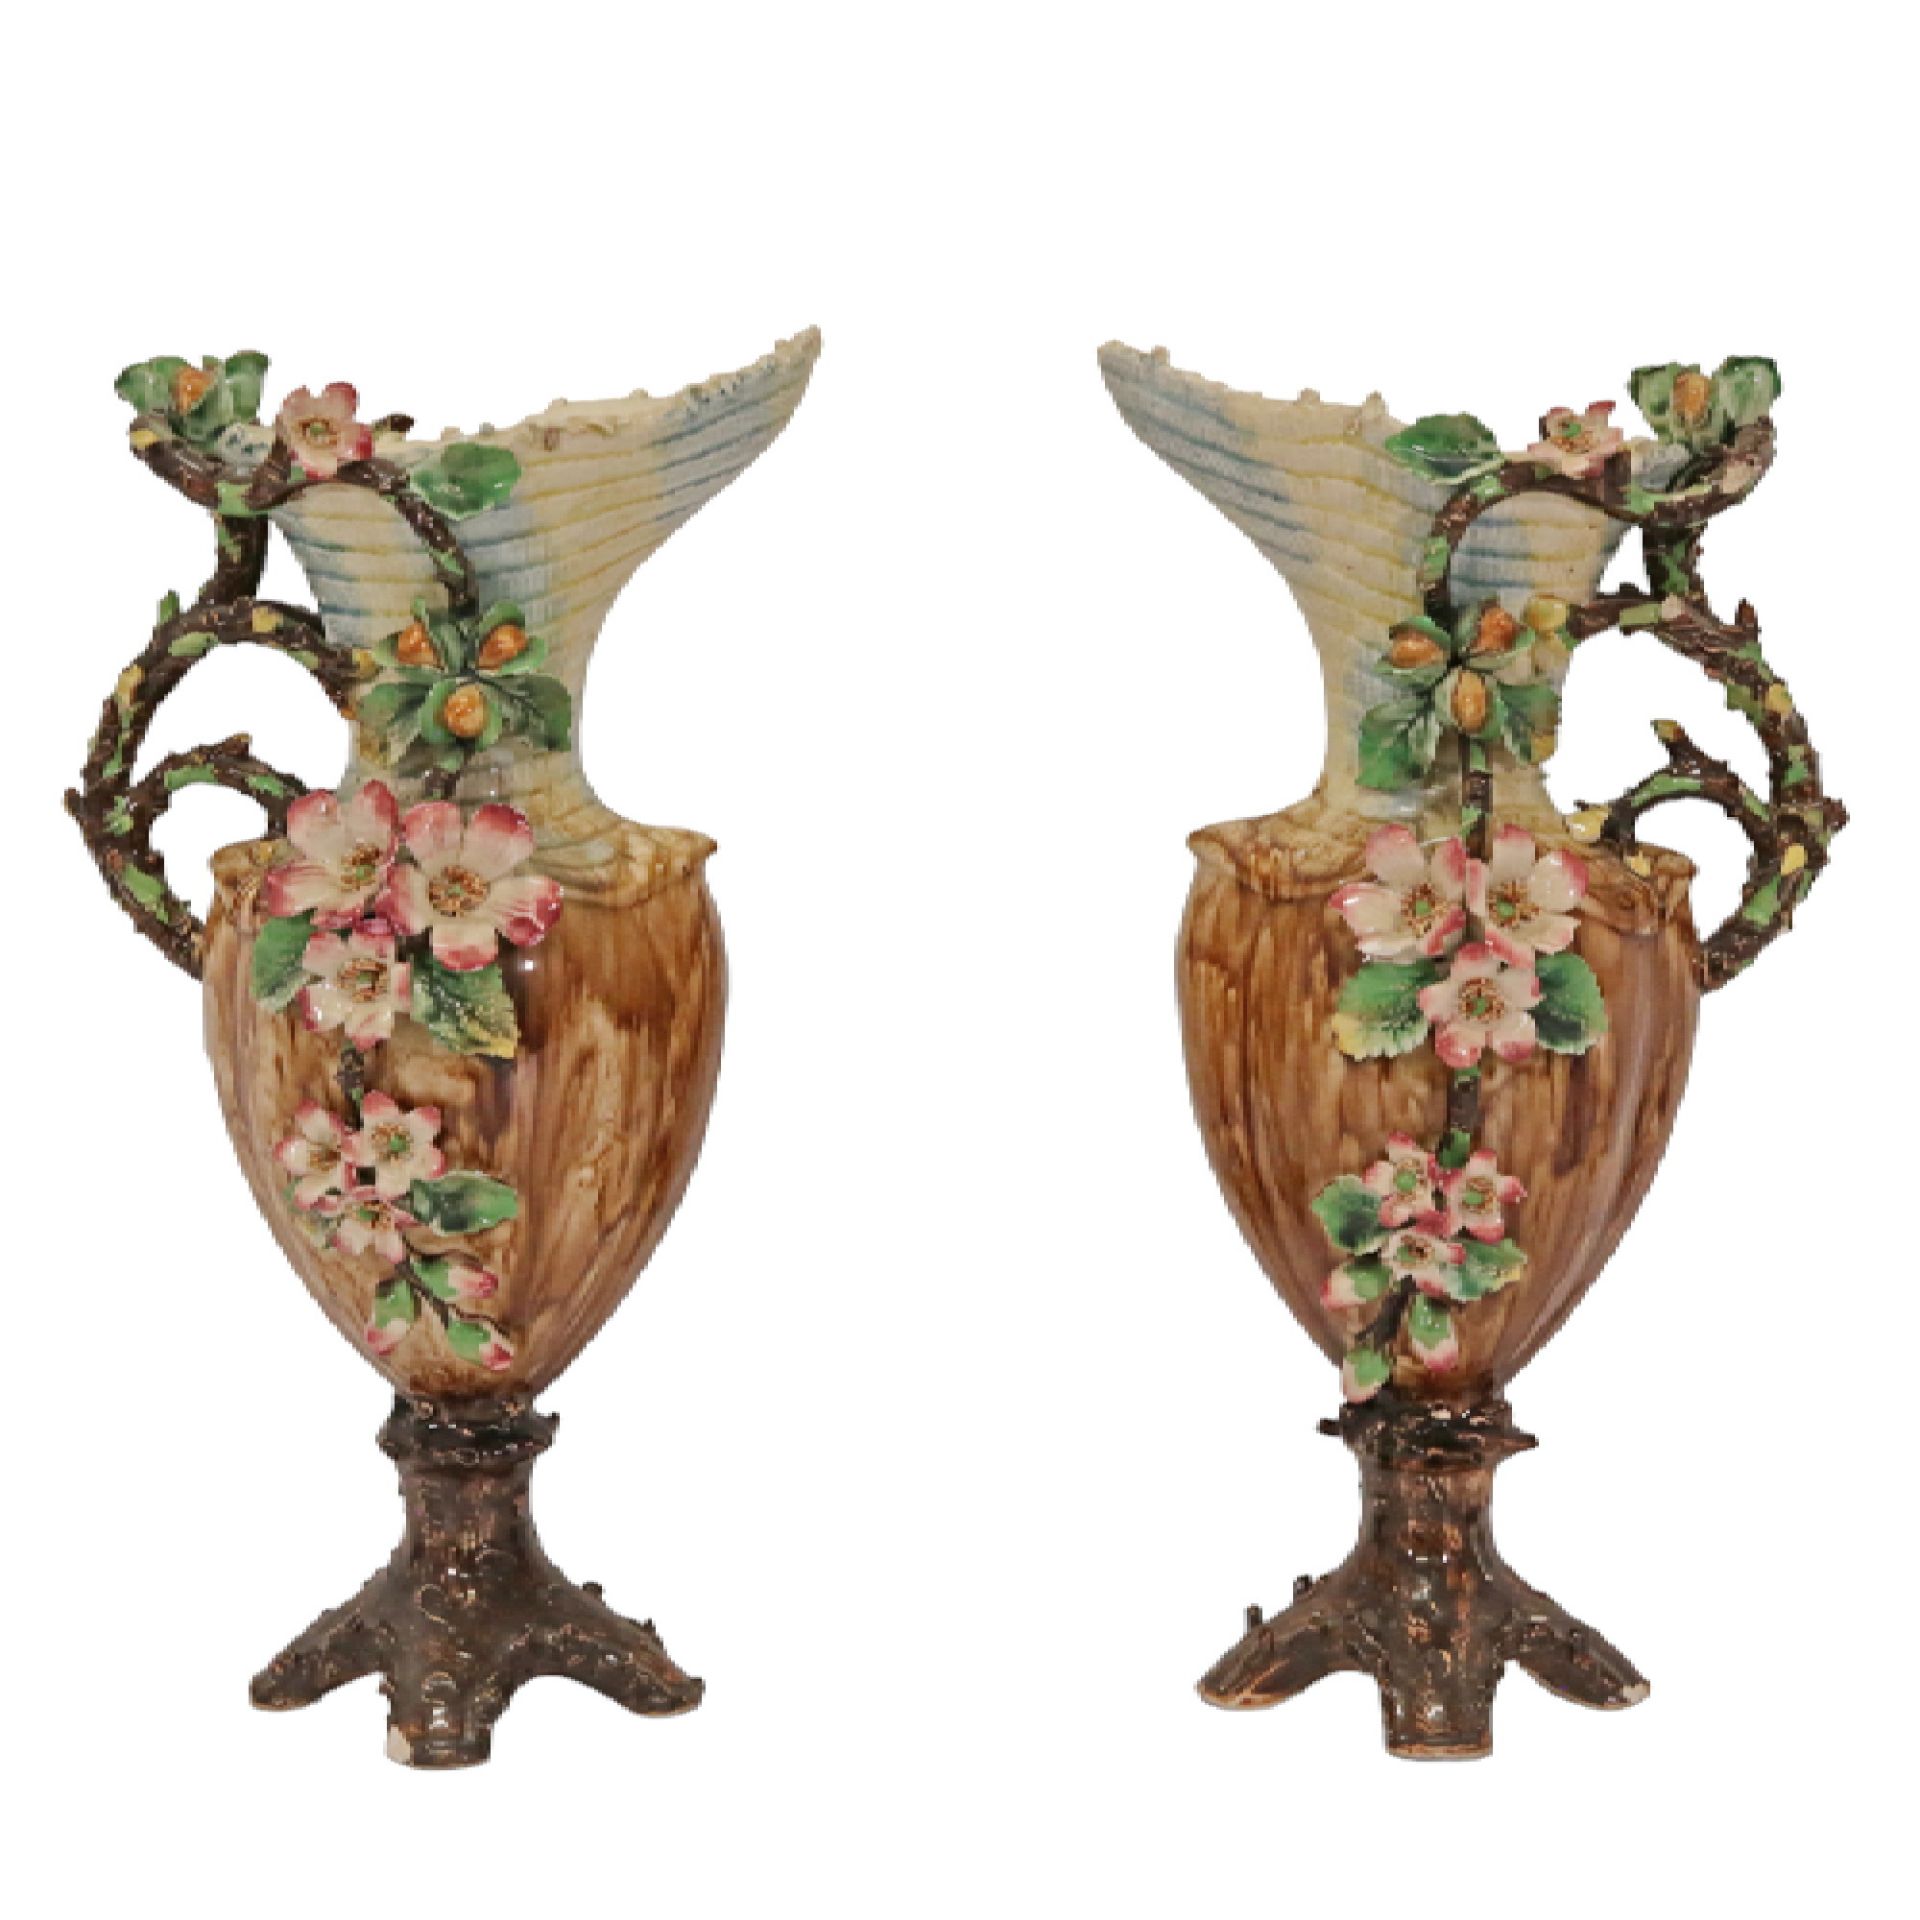 A PAIR OF JUGS IN THE ART-NOUTER STYLE IN BARBOTINE, ORIENTAL FAIENCE WATERWARE. circa 1900.